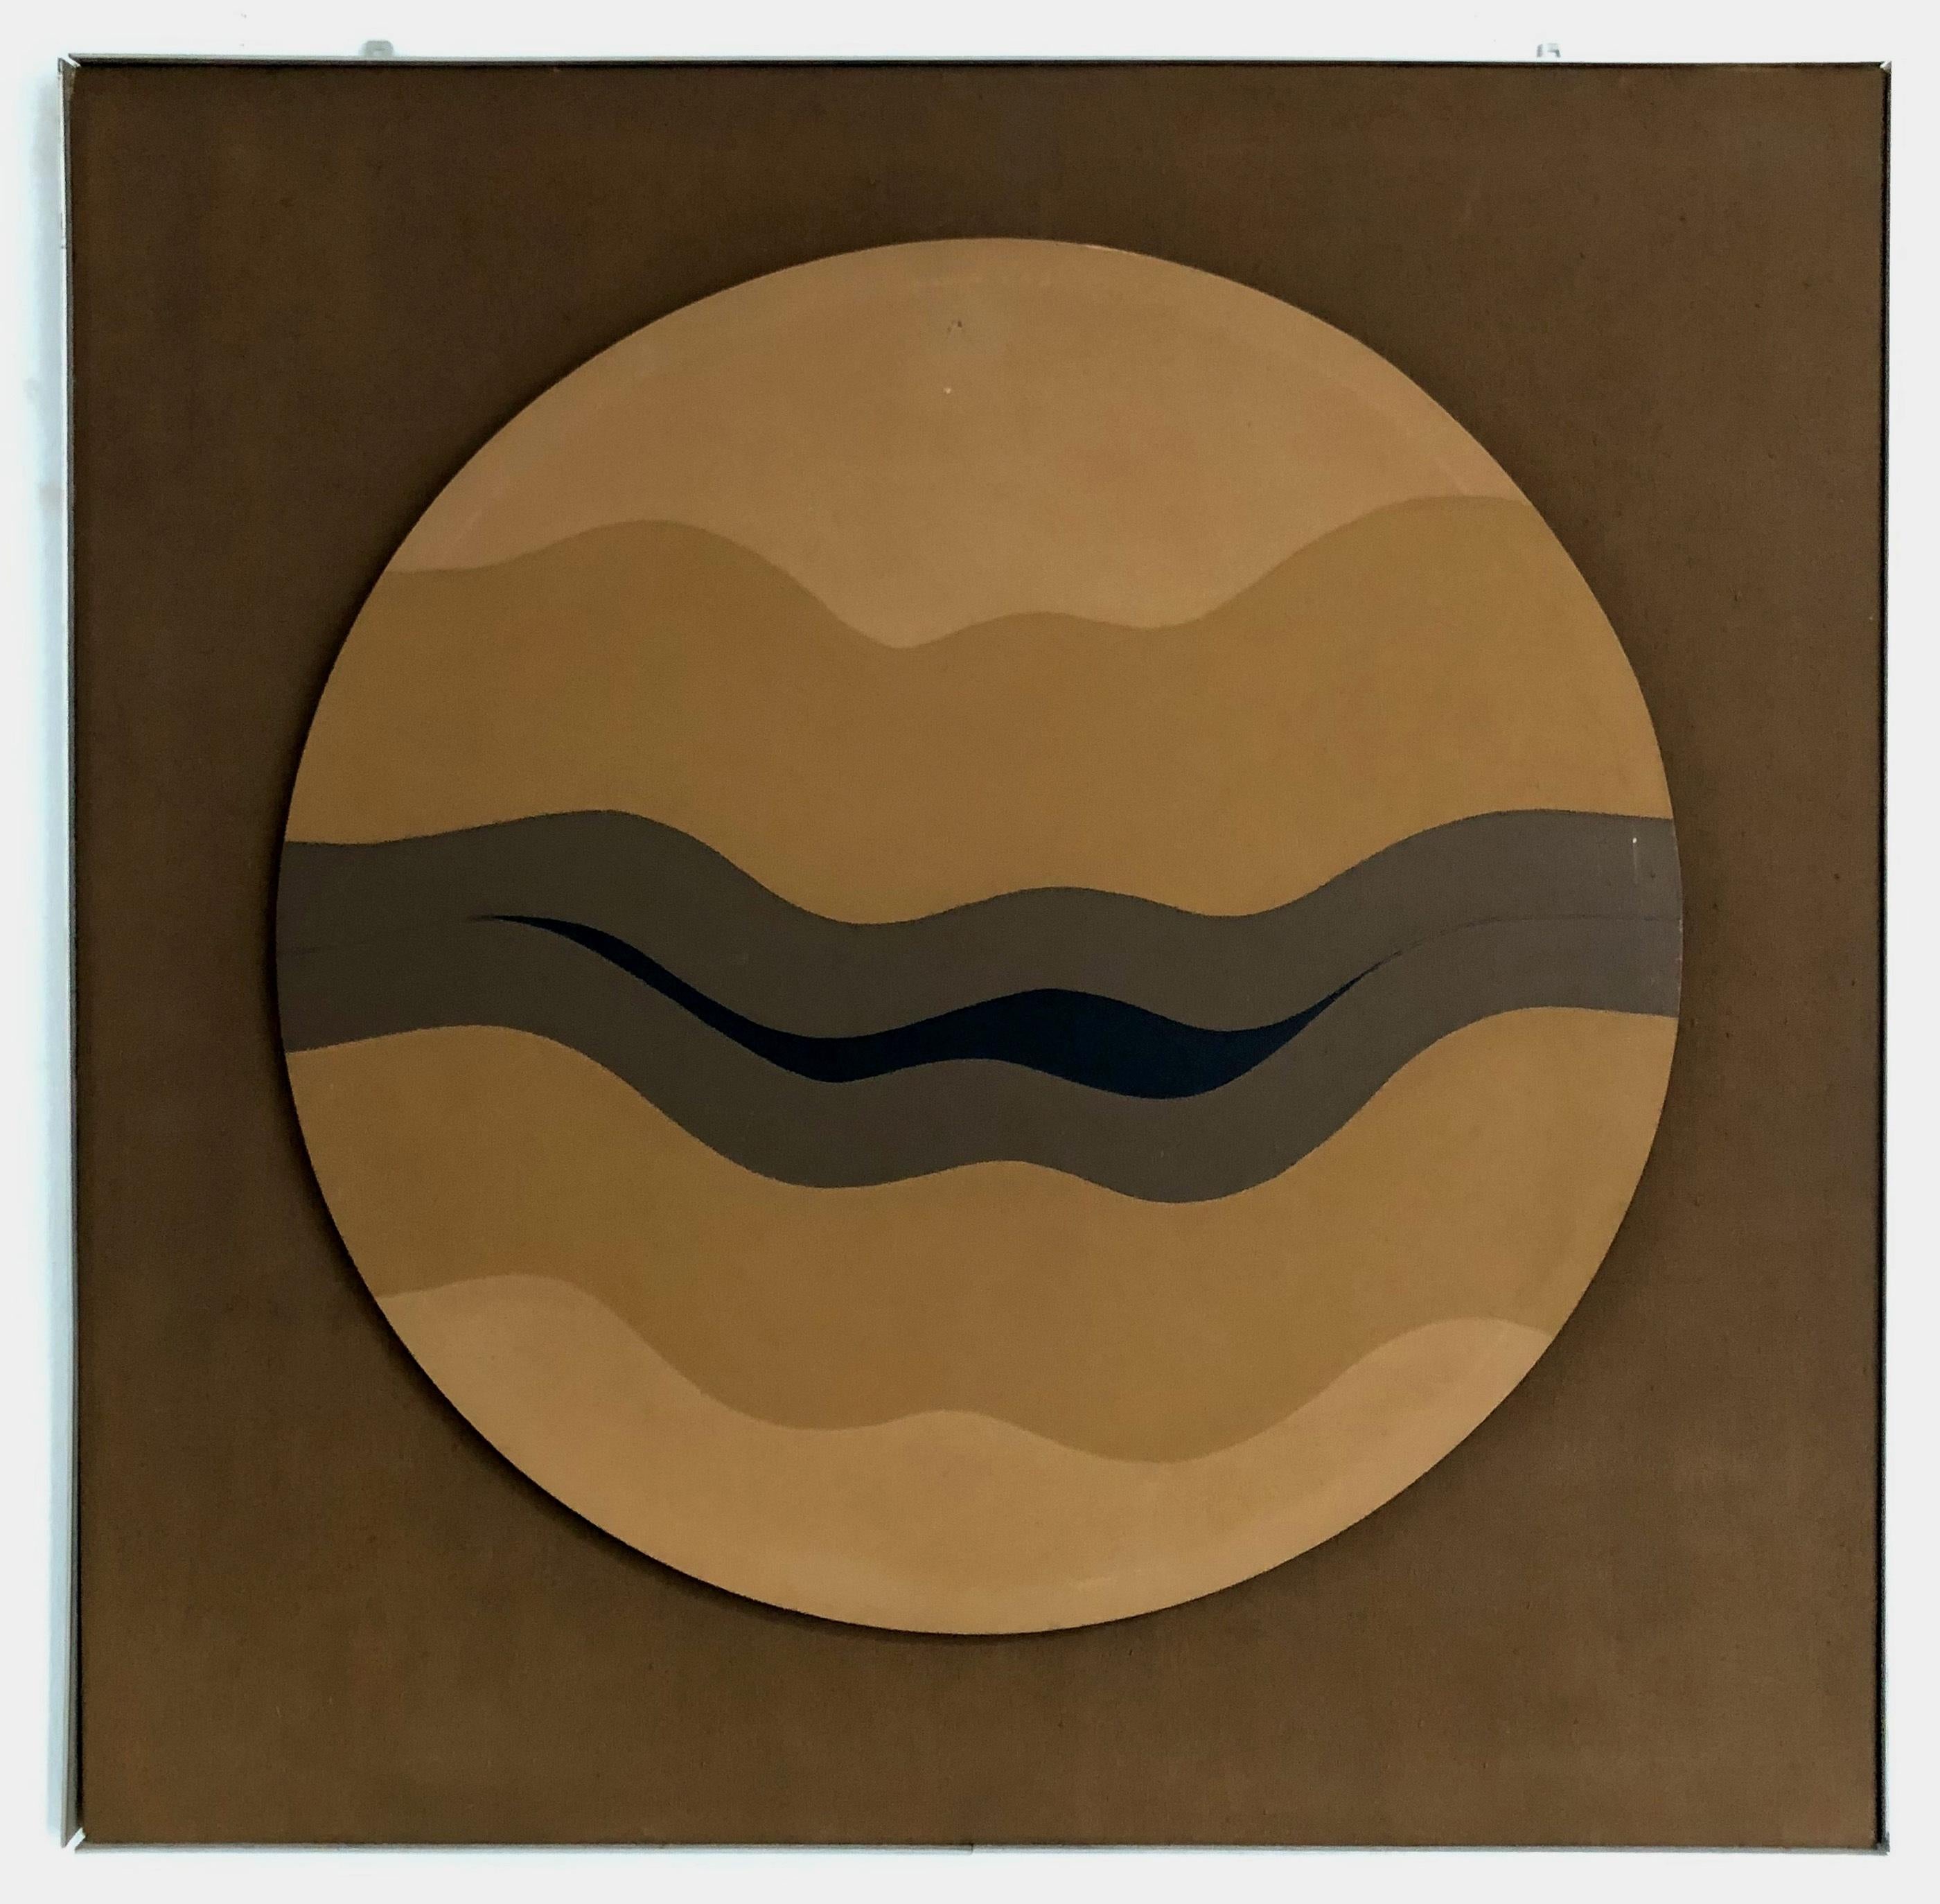 Hannes Grosse Abstract Painting - Wave Form II (Wellenform) (Square, Round, Wavy, Modern, Mid-Century) (40% OFF)